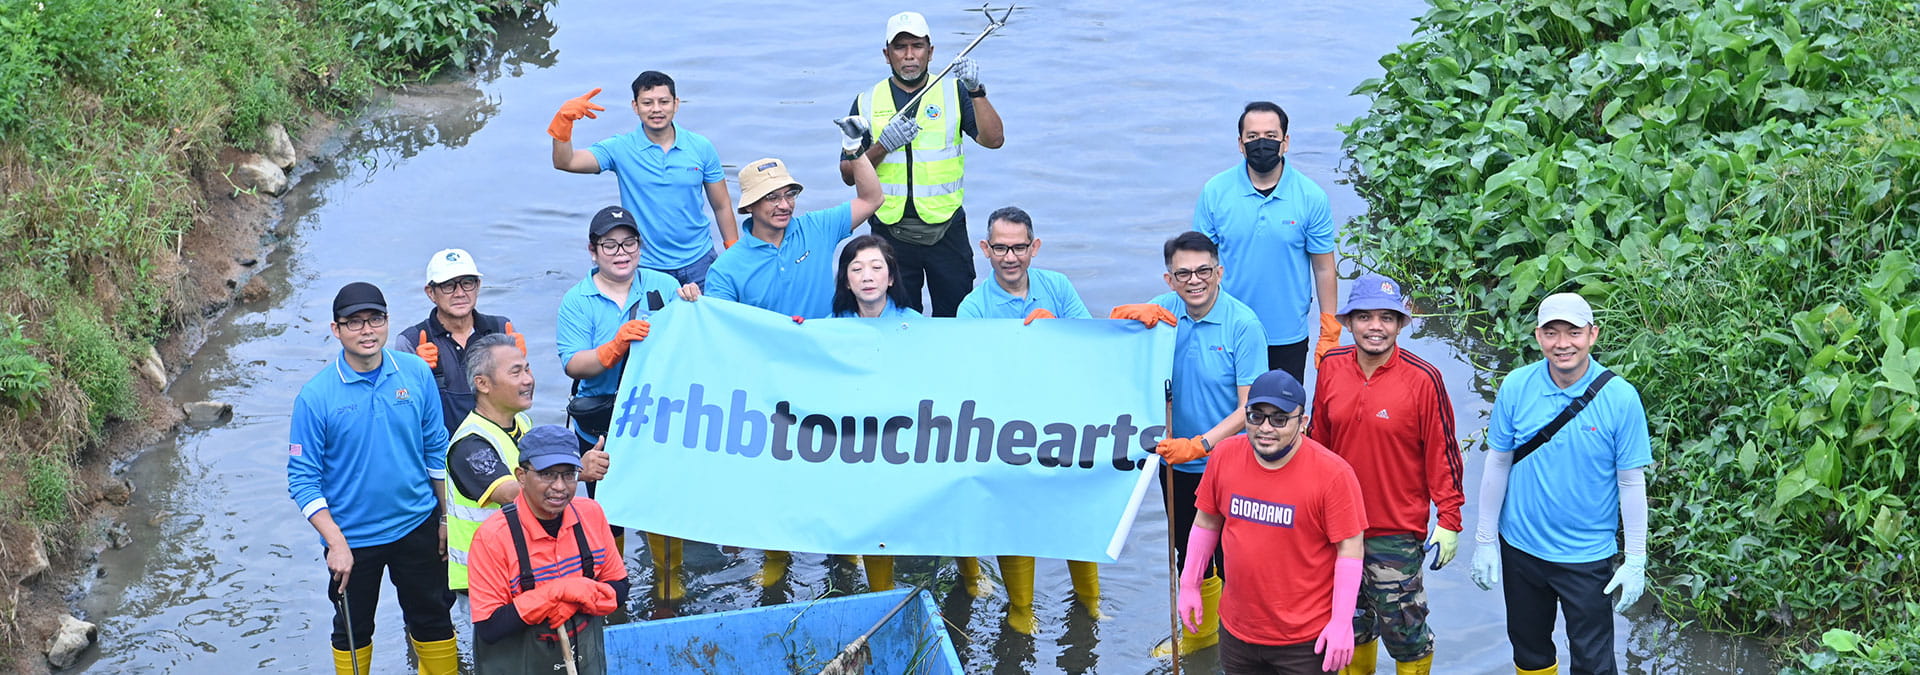 RHB Touch Hearts 2022 banner